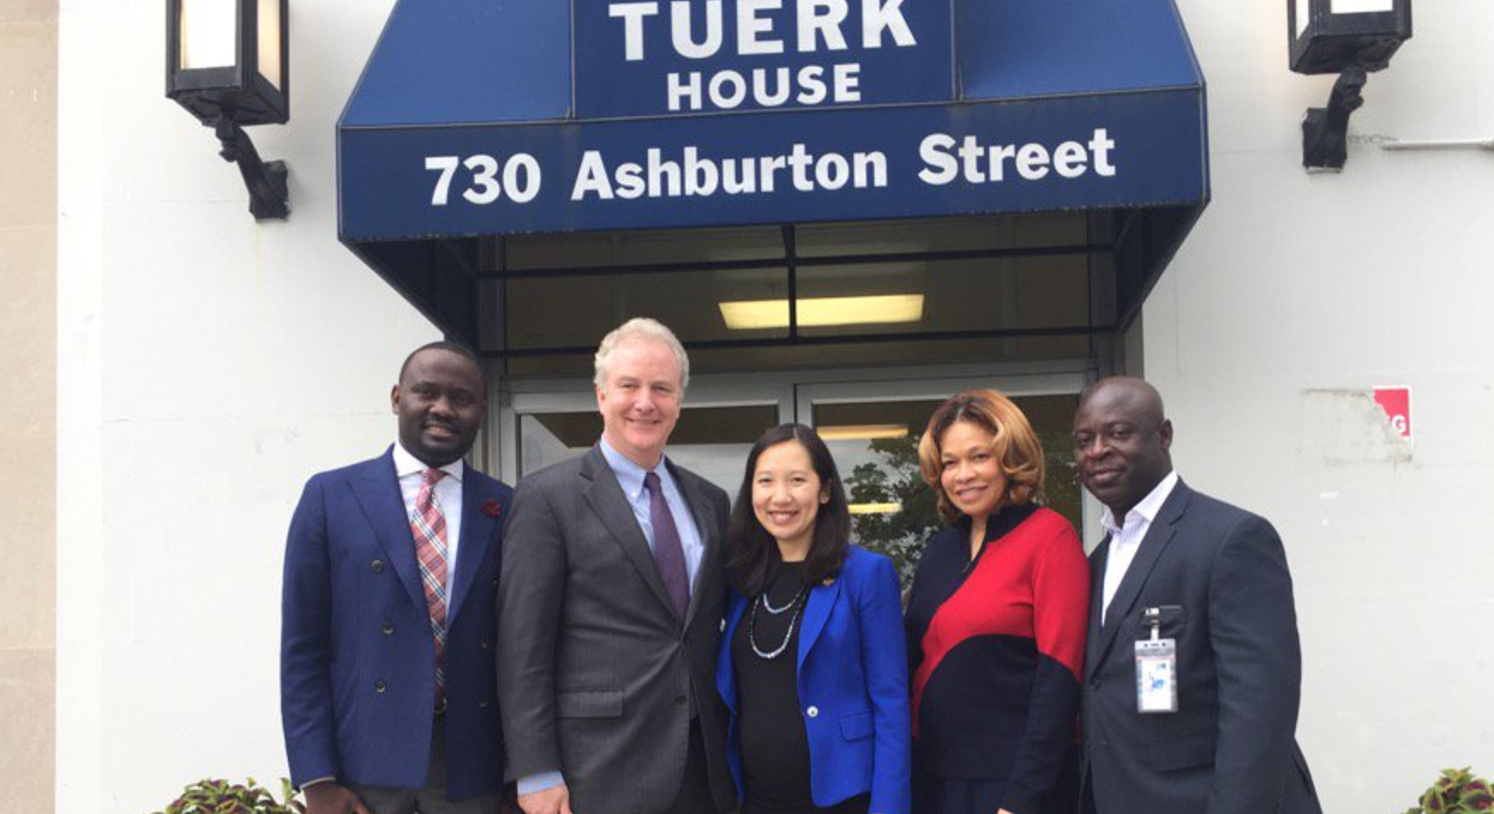 Dr Wen and Senator Van Hollen Visiting Tuerk House in Baltimore City to Expand Substance Use Addiction Access